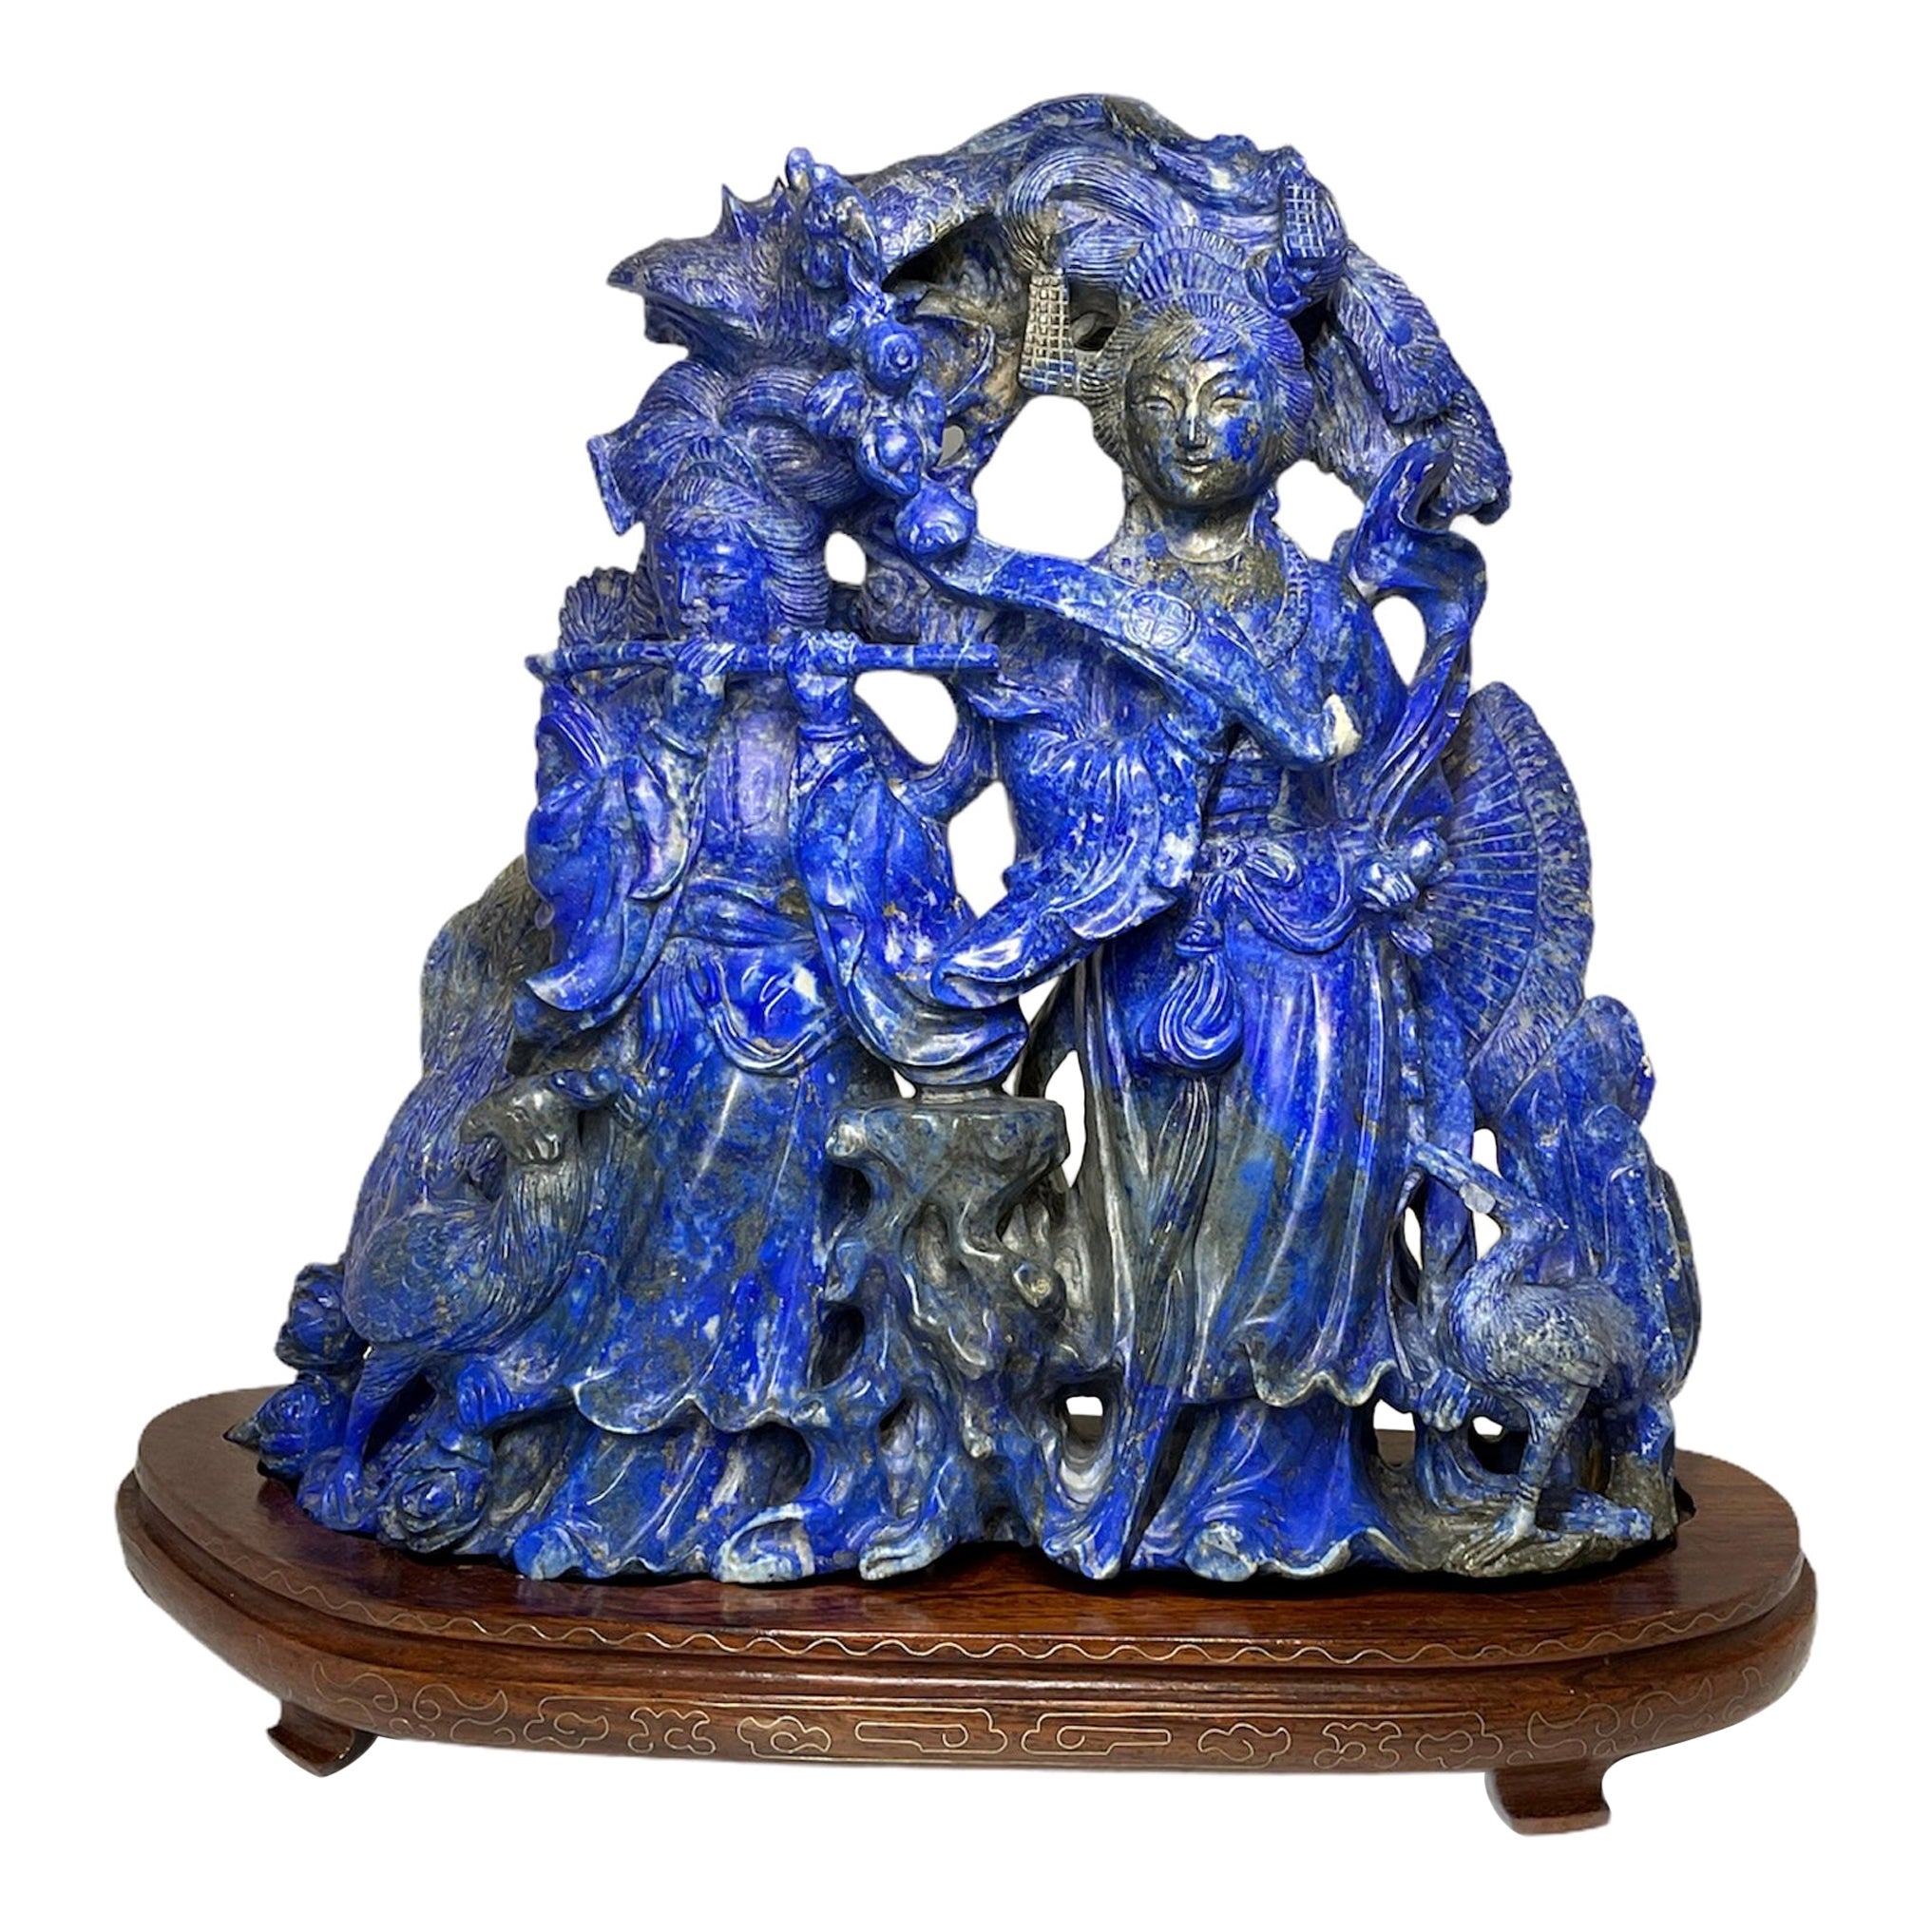 Chinese Lapis Lazuli Carved Group of Figures Sculpture